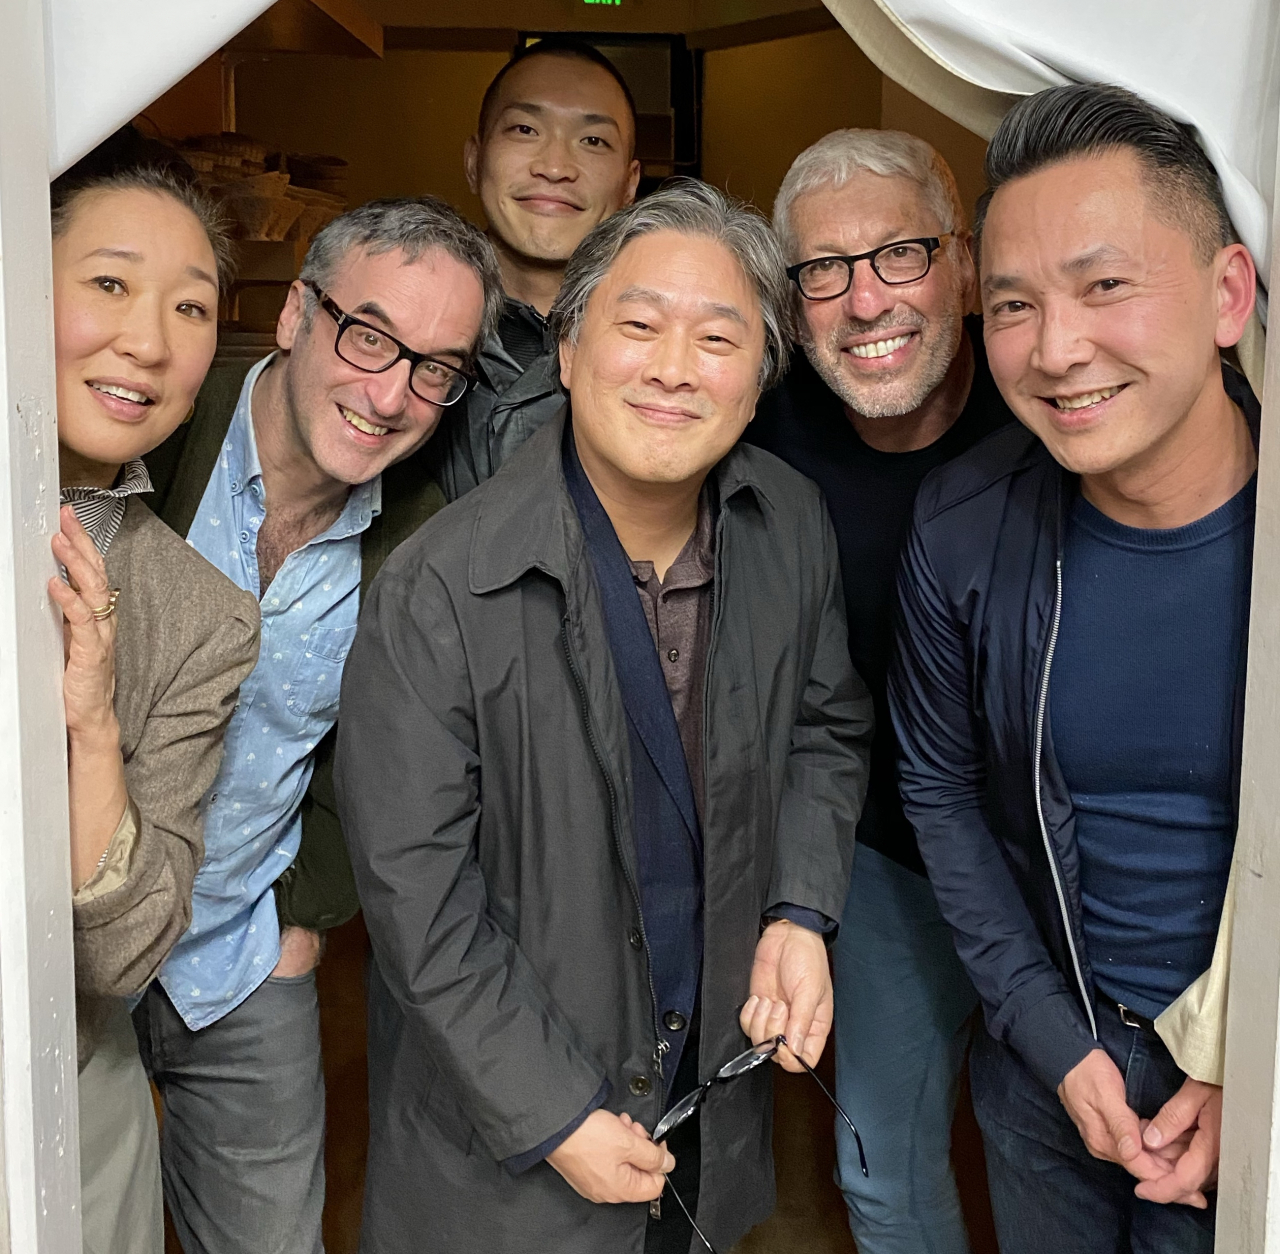 From left: Actor Sandra Oh, head writer Don McKellar, interpreter Jaehuen Chung, director Park Chan-wook, producer Niv Fichman and writer Viet Thanh Nguyen in March 2020. (Courtesy of Viet Thanh Nguyen)